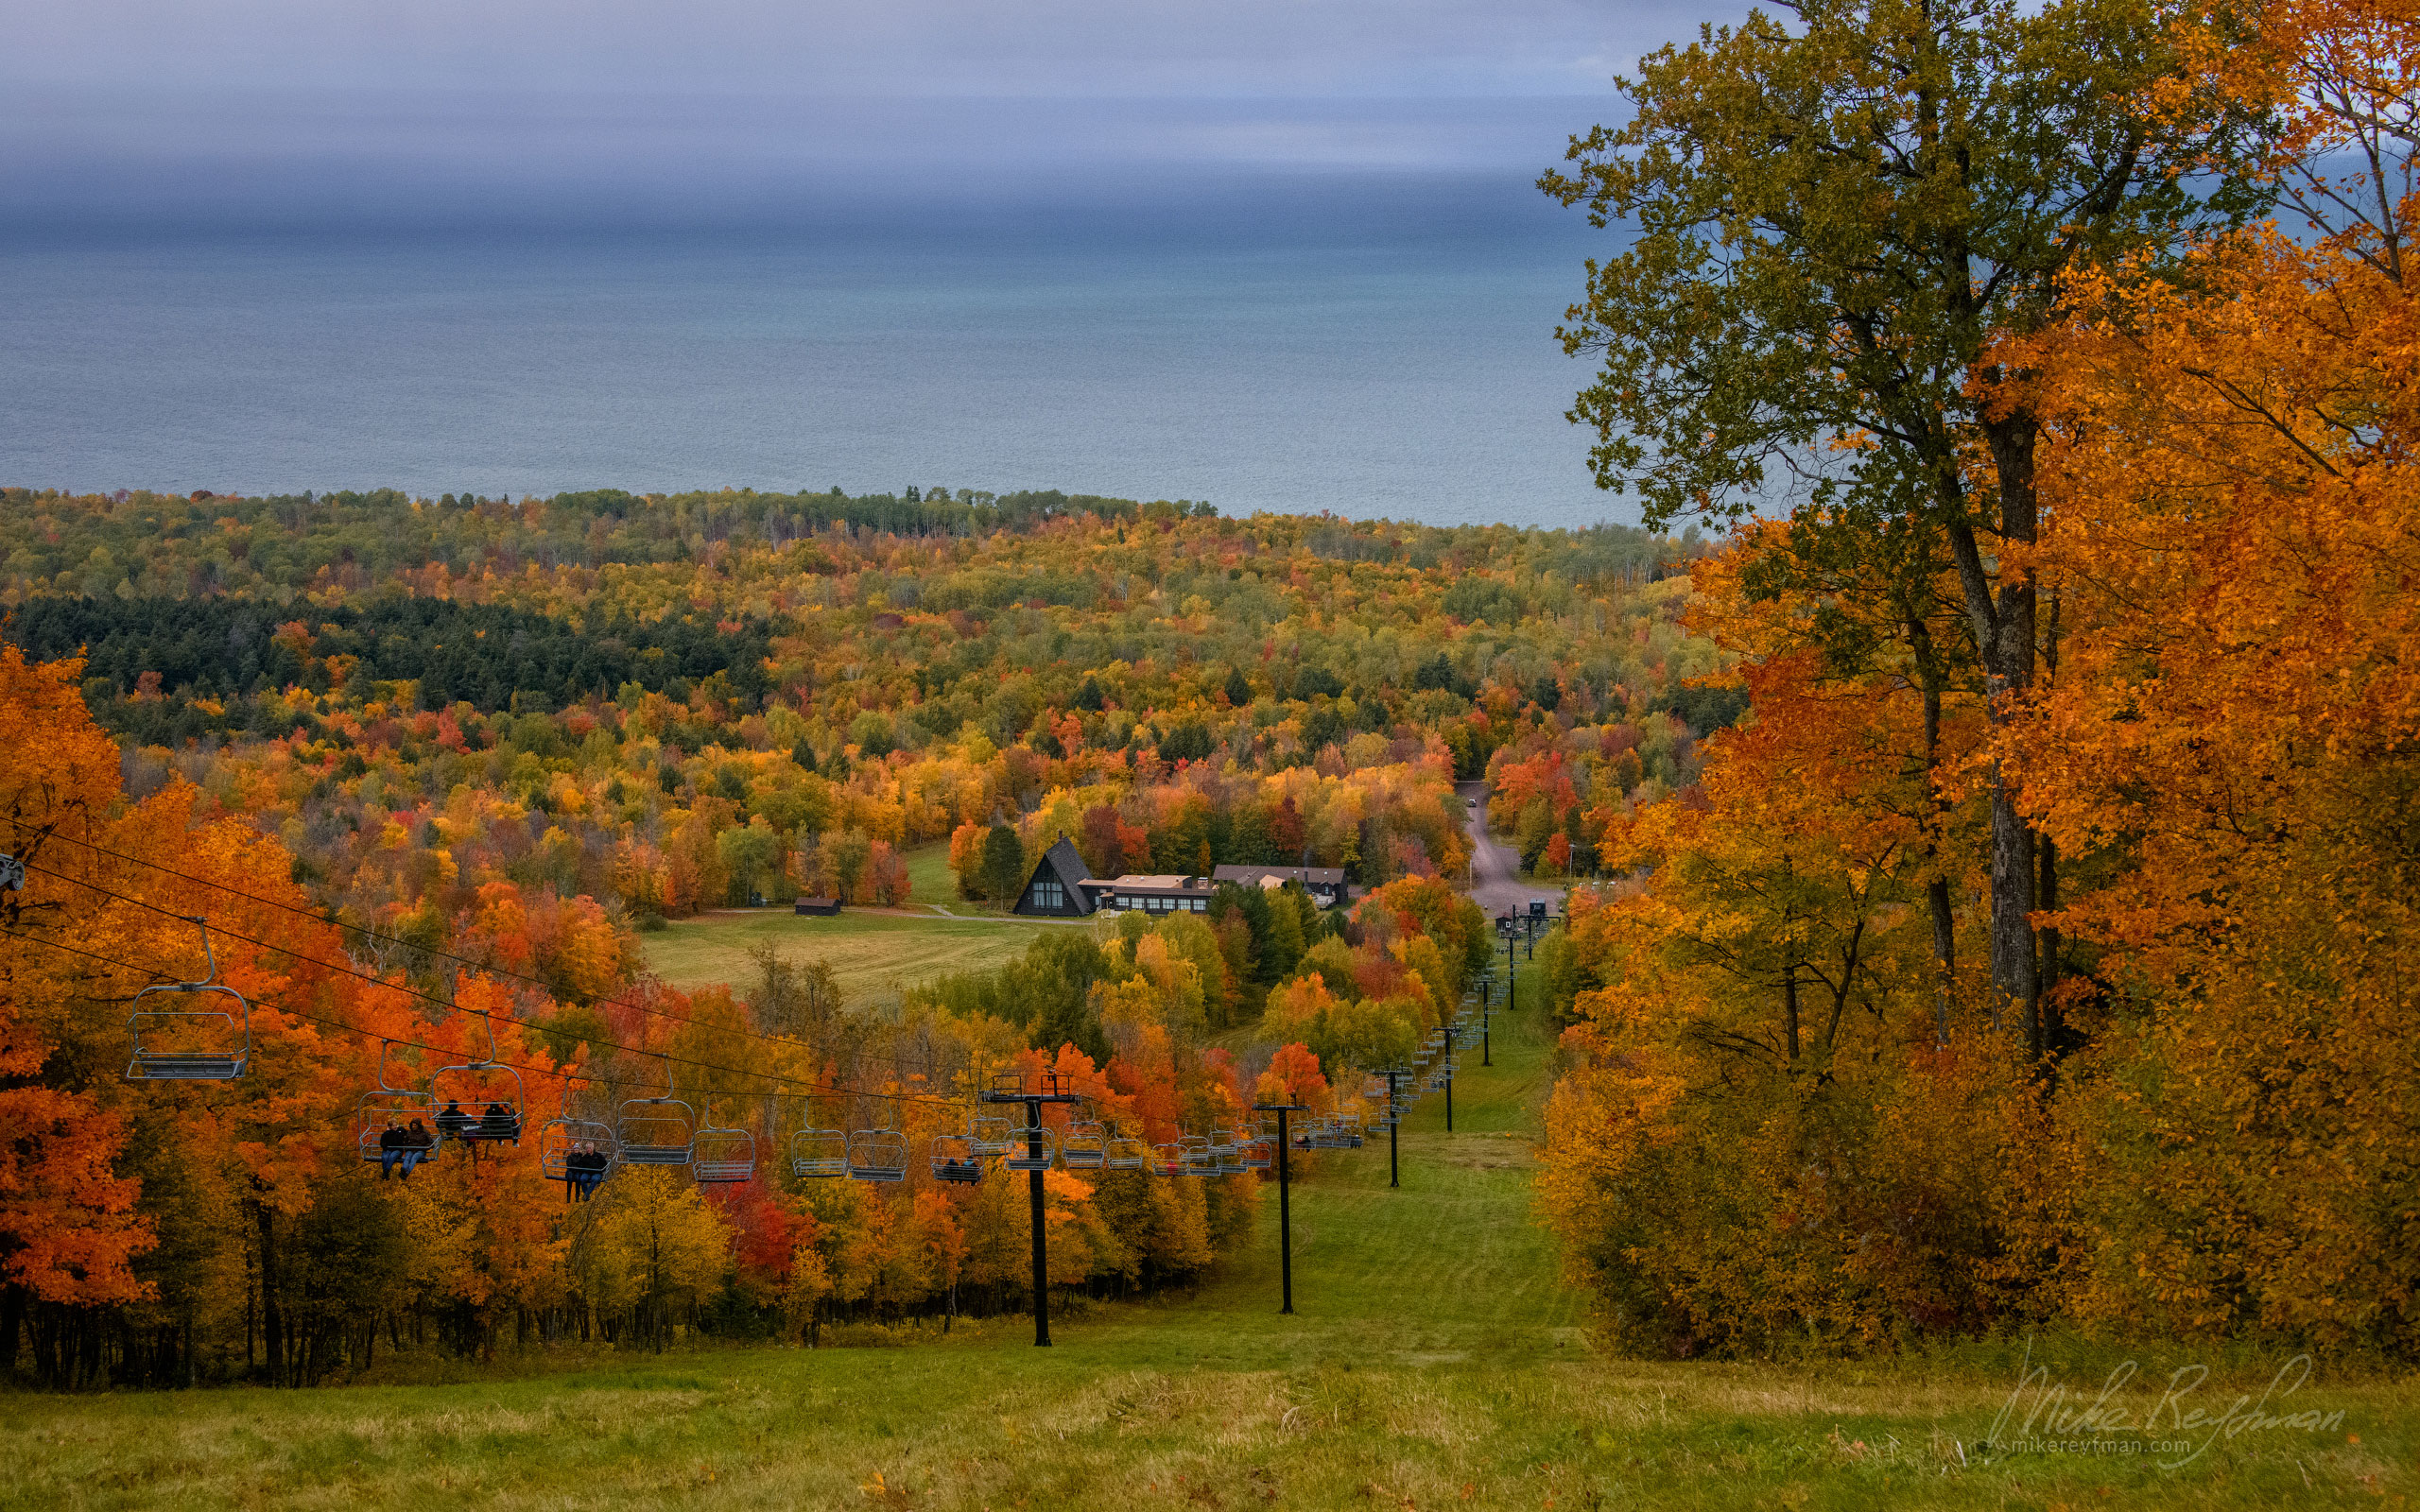 Porcupine Mountains Chair Lift fall colors. Porcupine Mountains, Upper Peninsula, Michigan, USA UP-MI_067_50E3058.jpg - Michigan's Upper Peninsula - the best destination in US for fall colors. - Mike Reyfman Photography